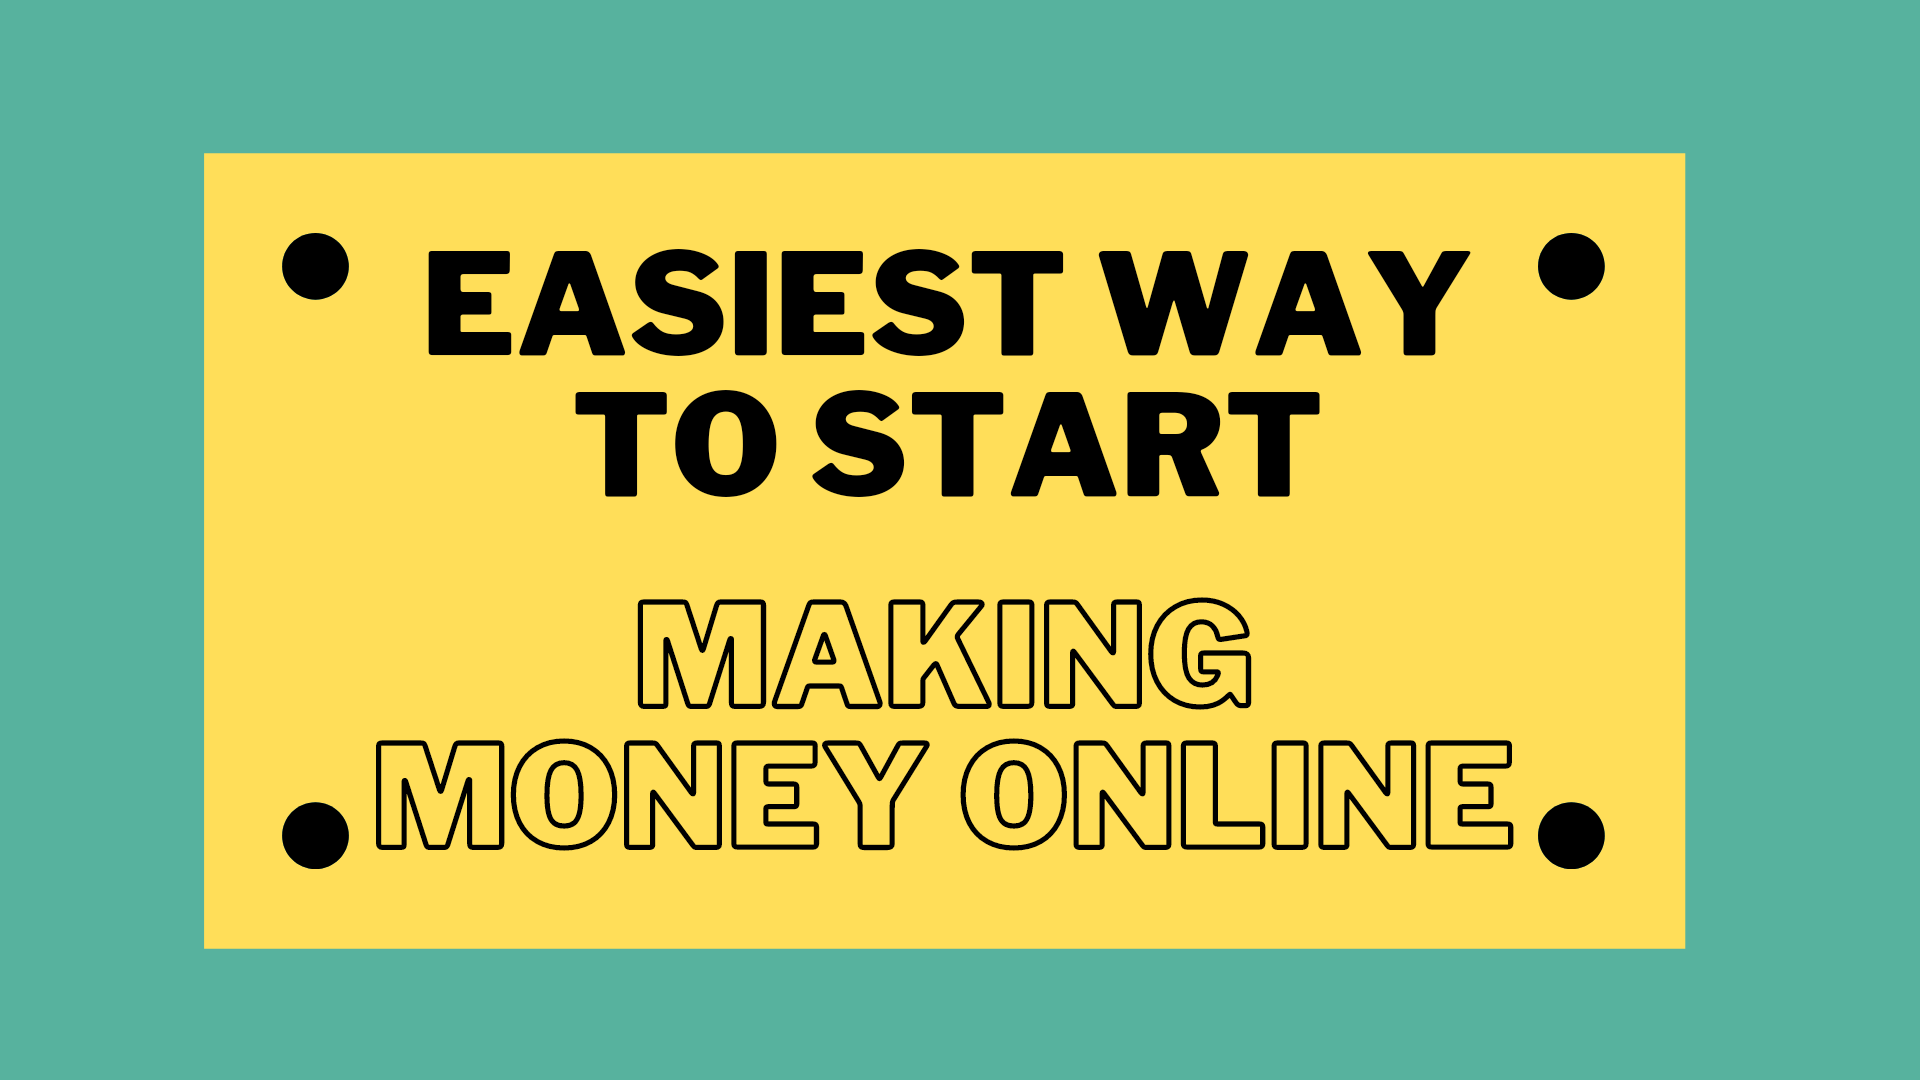 The image is a graphic related to: easiest way to start making money online.